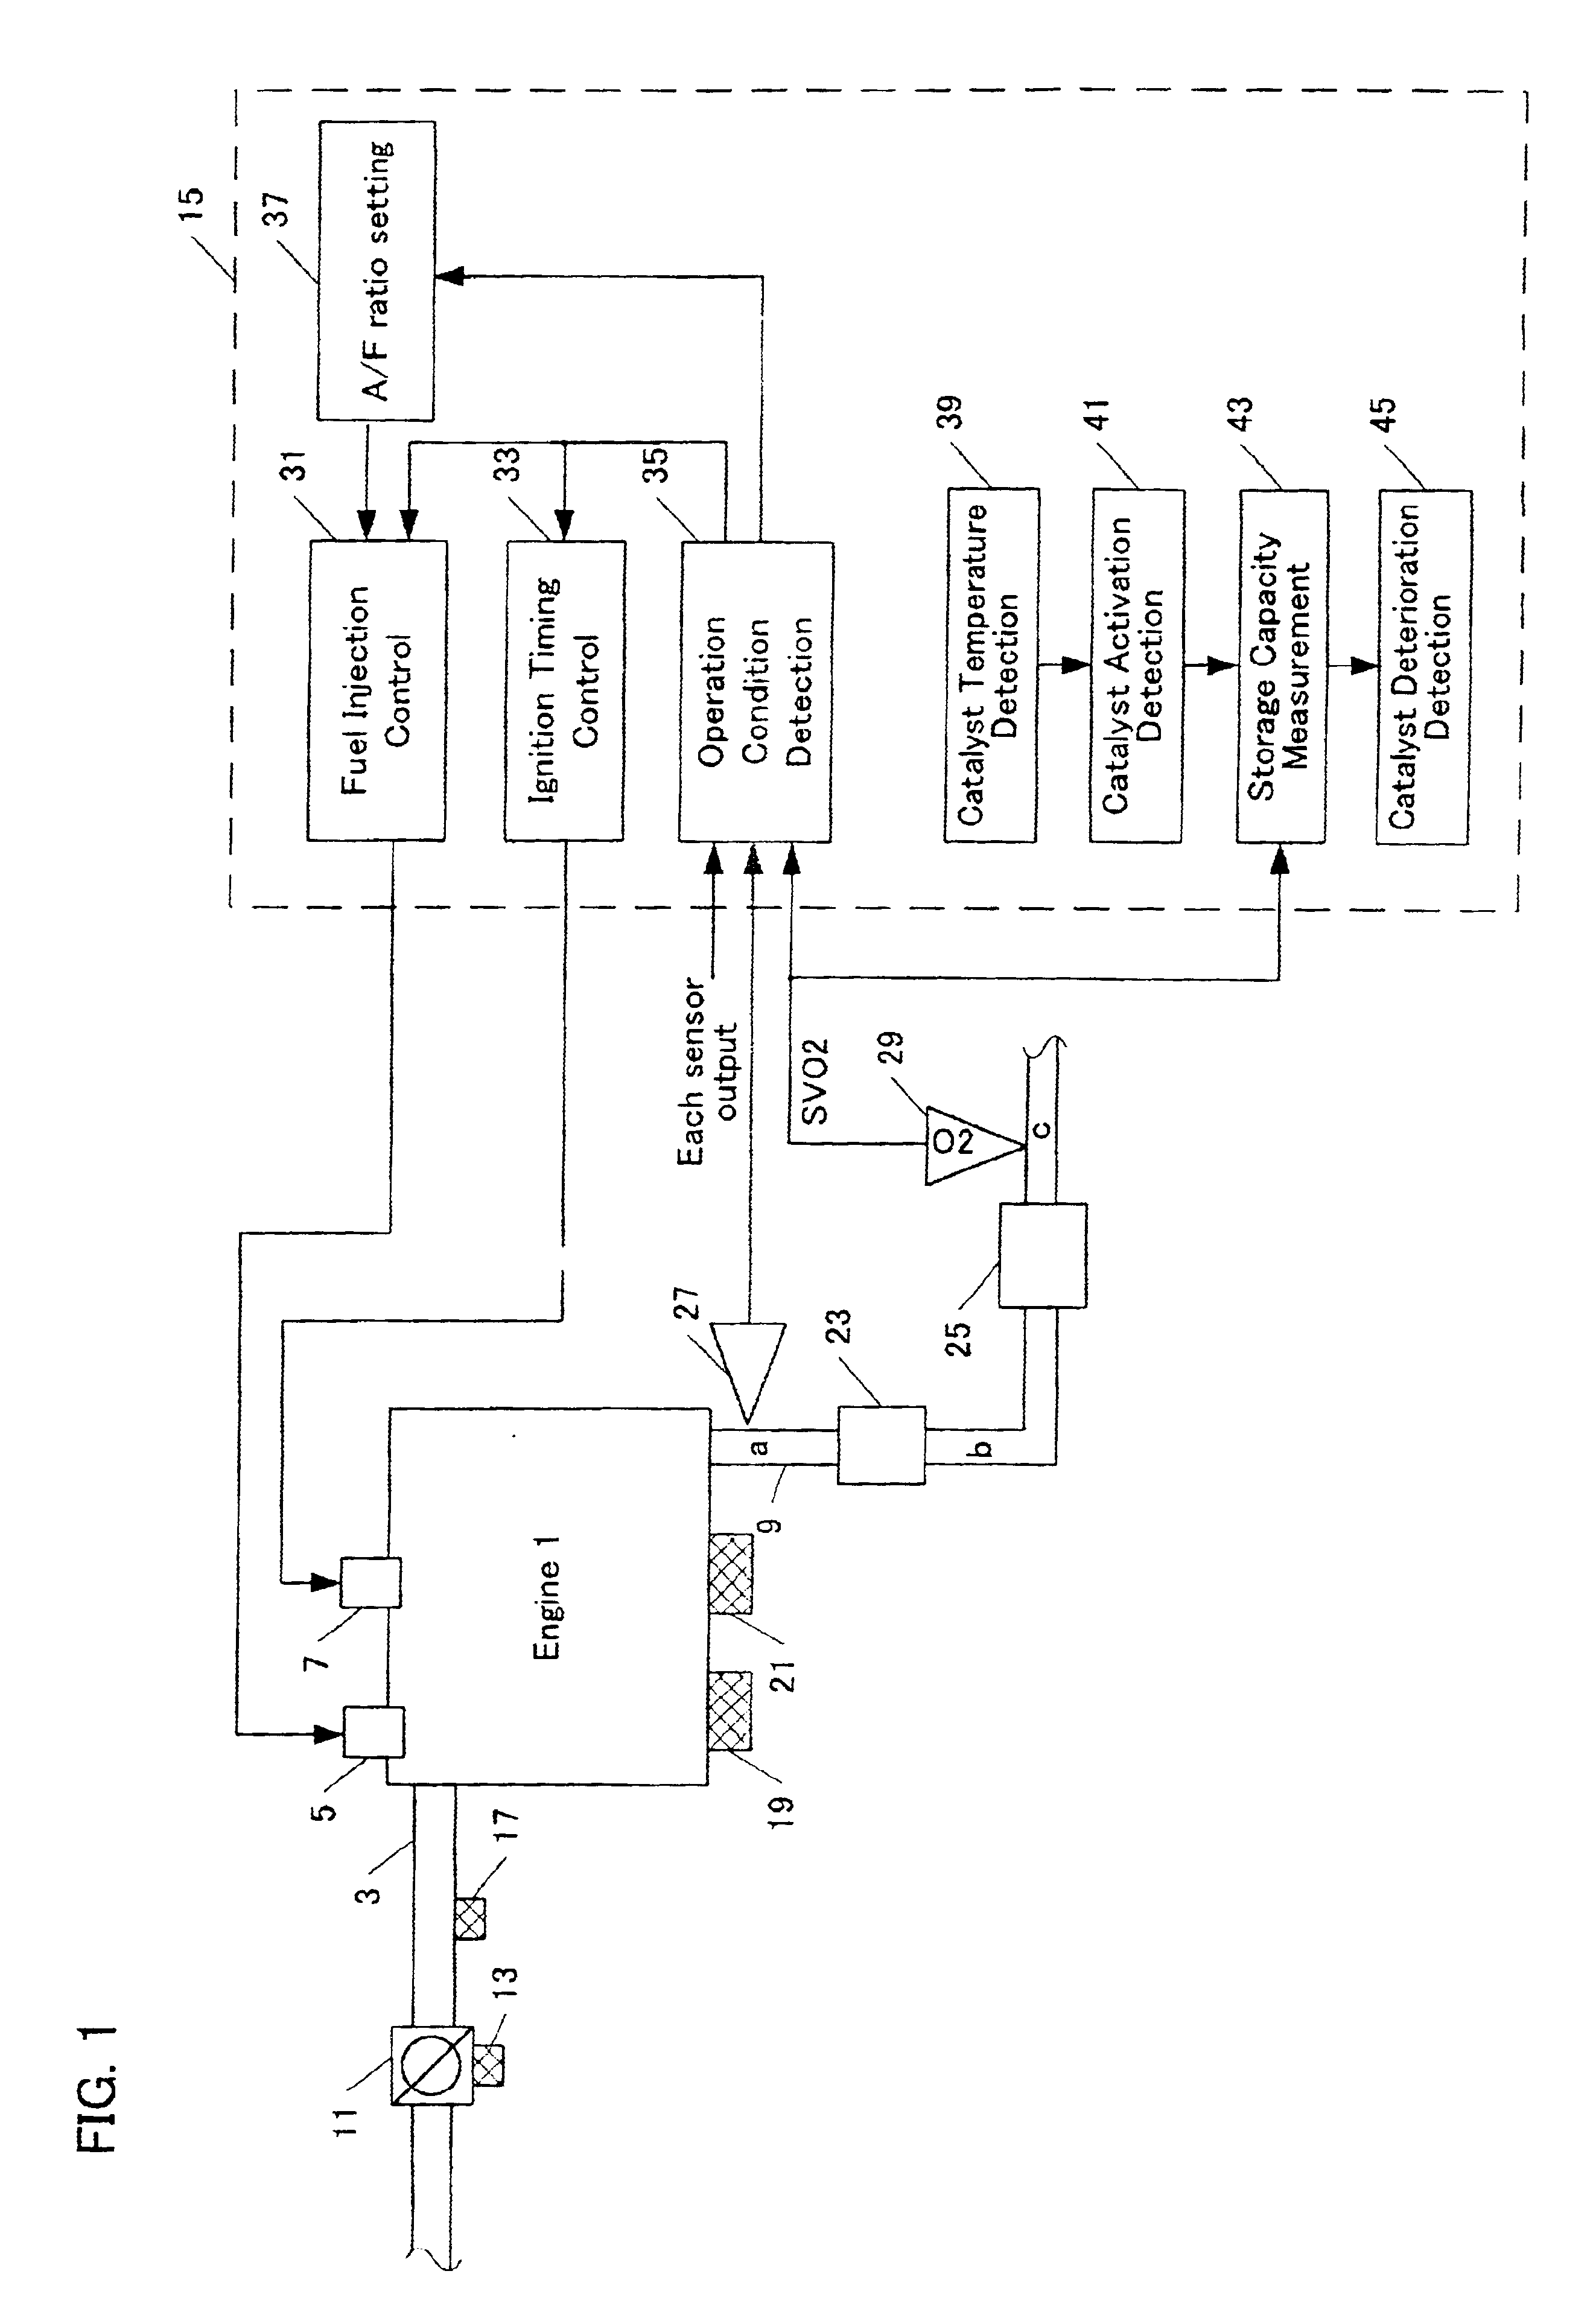 Catalyst deterioration detecting system for an automobile